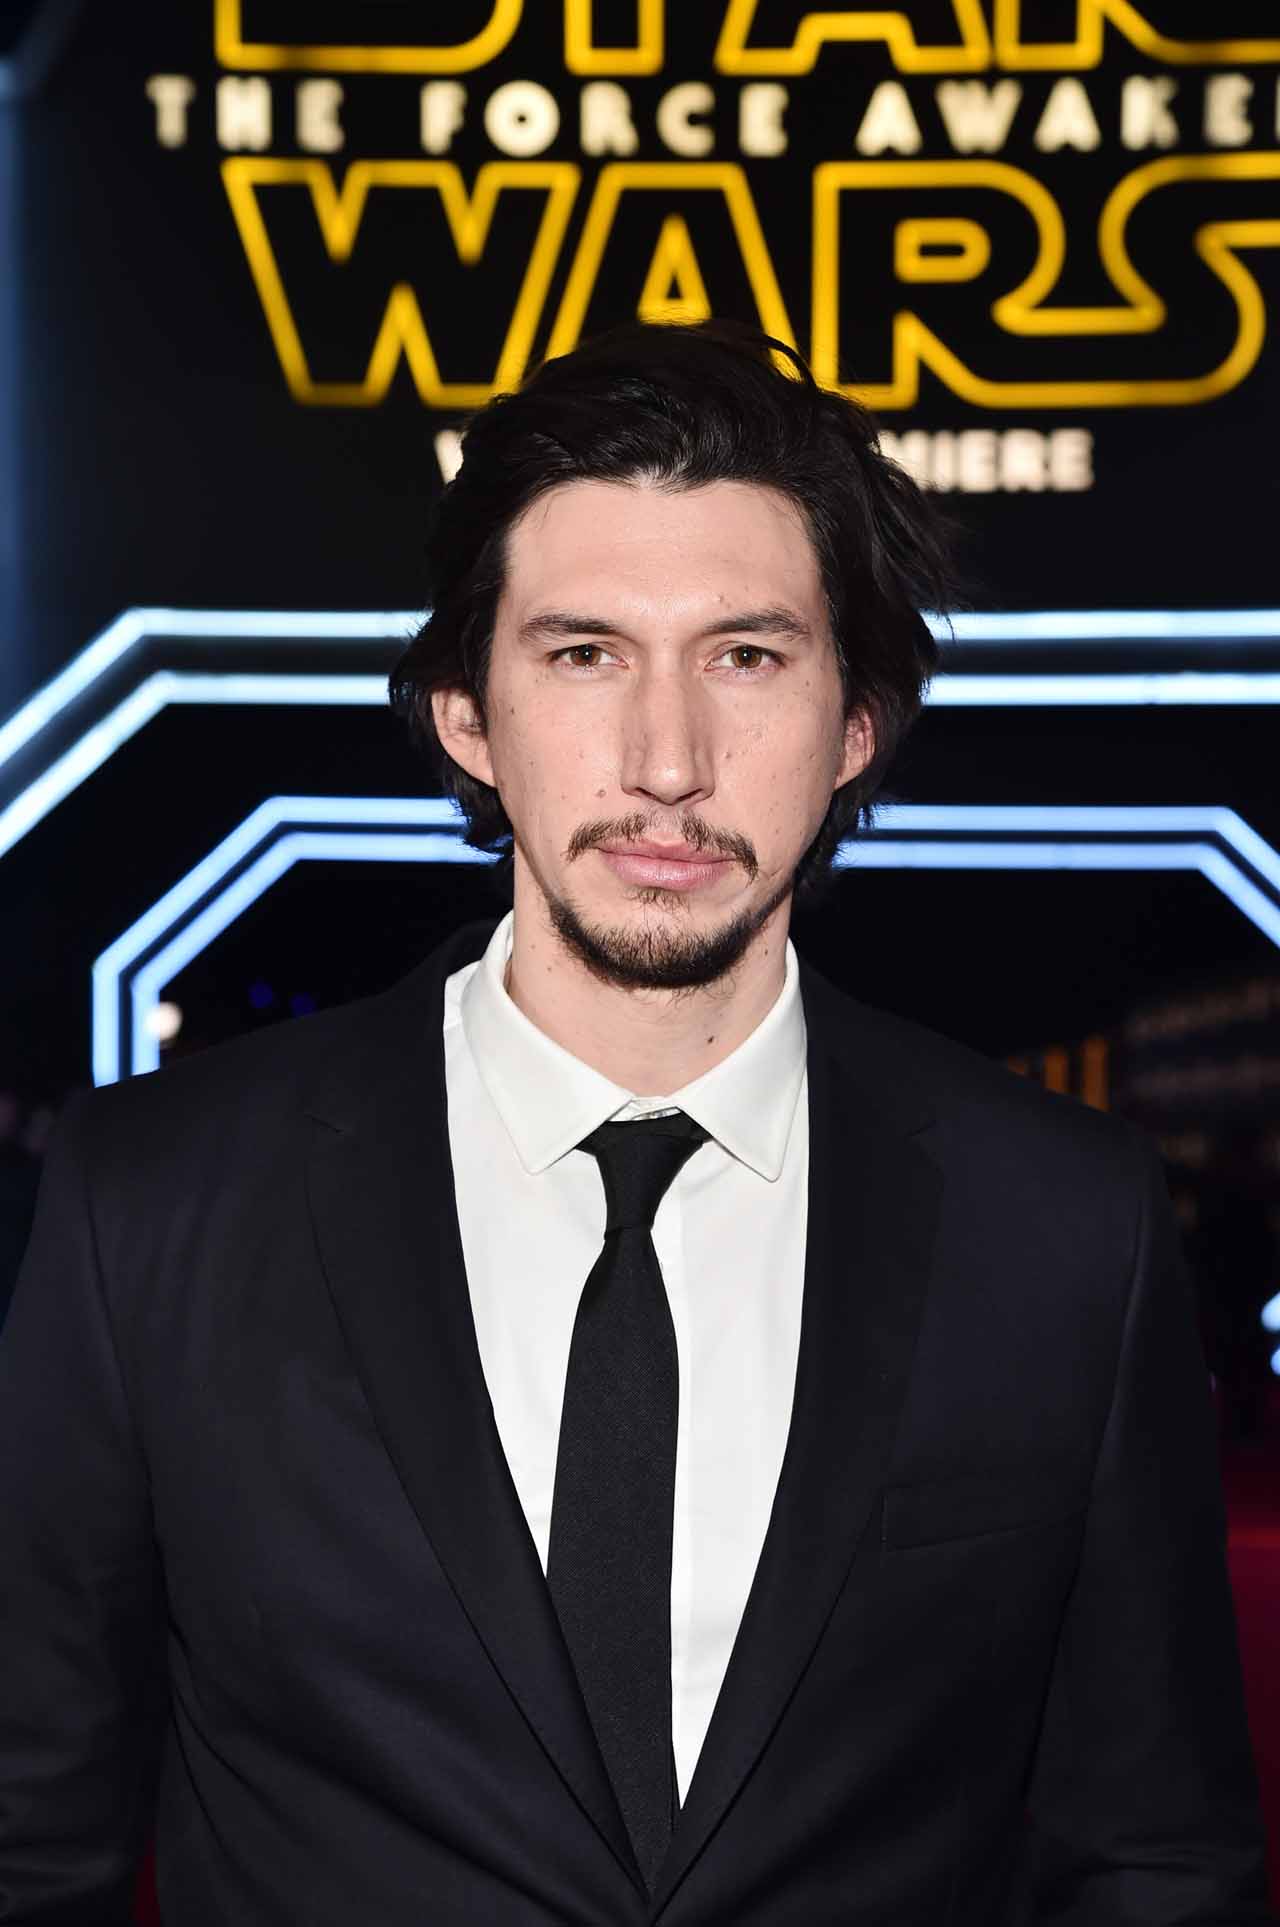 HOLLYWOOD, CA - DECEMBER 14:  Actor Adam Driver attends the World Premiere of ?Star Wars: The Force Awakens? at the Dolby, El Capitan, and TCL Theatres on December 14, 2015 in Hollywood, California.  (Photo by Alberto E. Rodriguez/Getty Images for Disney) *** Local Caption *** Adam Driver